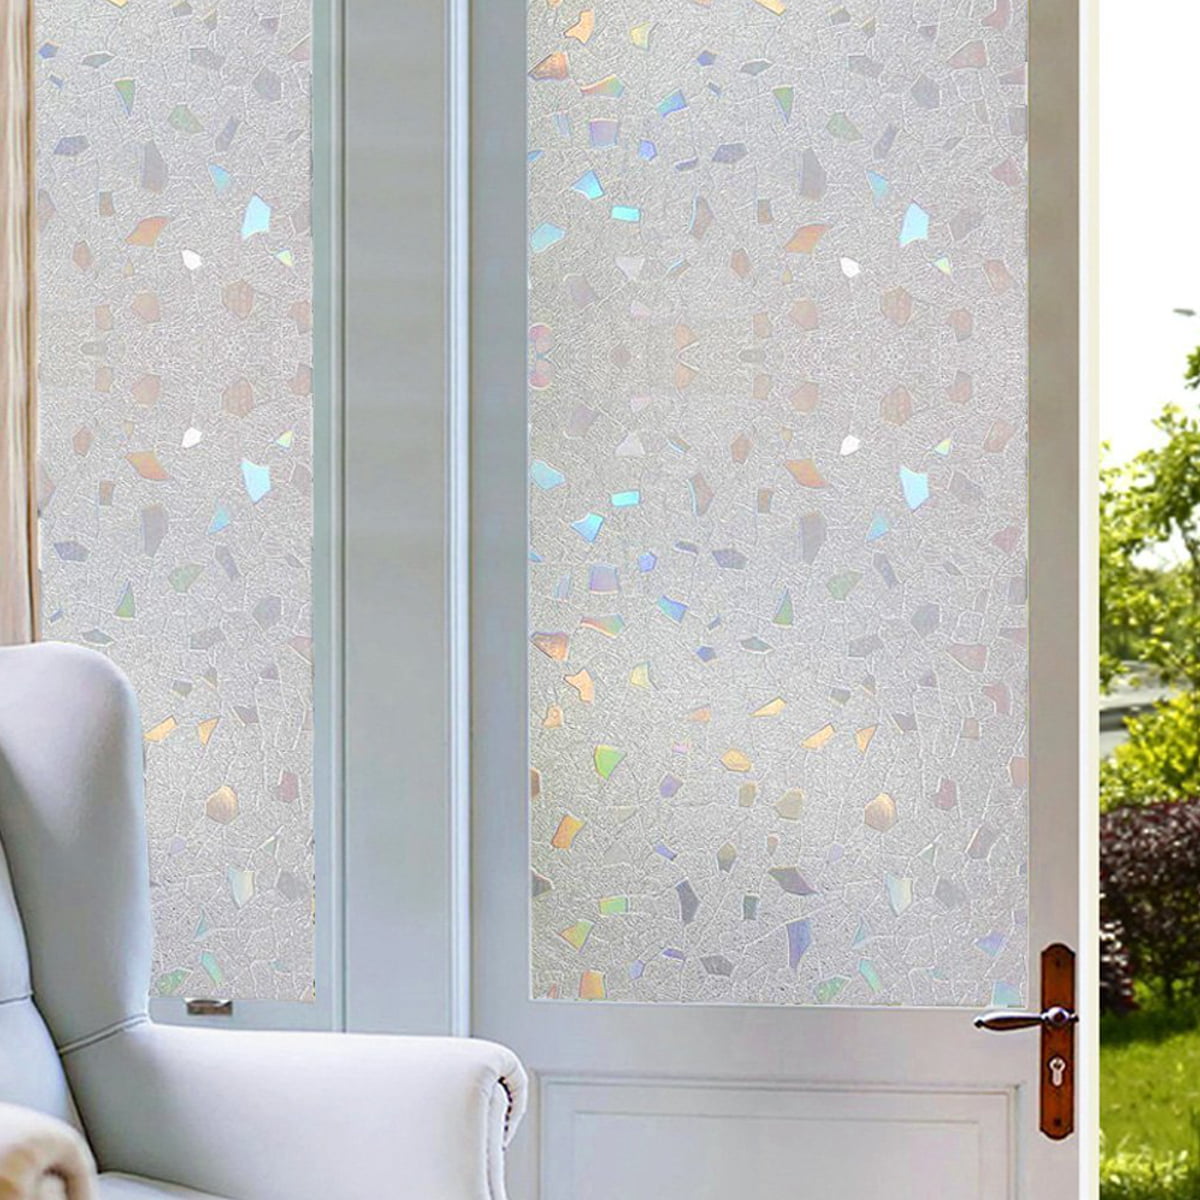 Waterproof Frosted Opaque Window Film Privacy Adhesive Glass Stickers Sale 